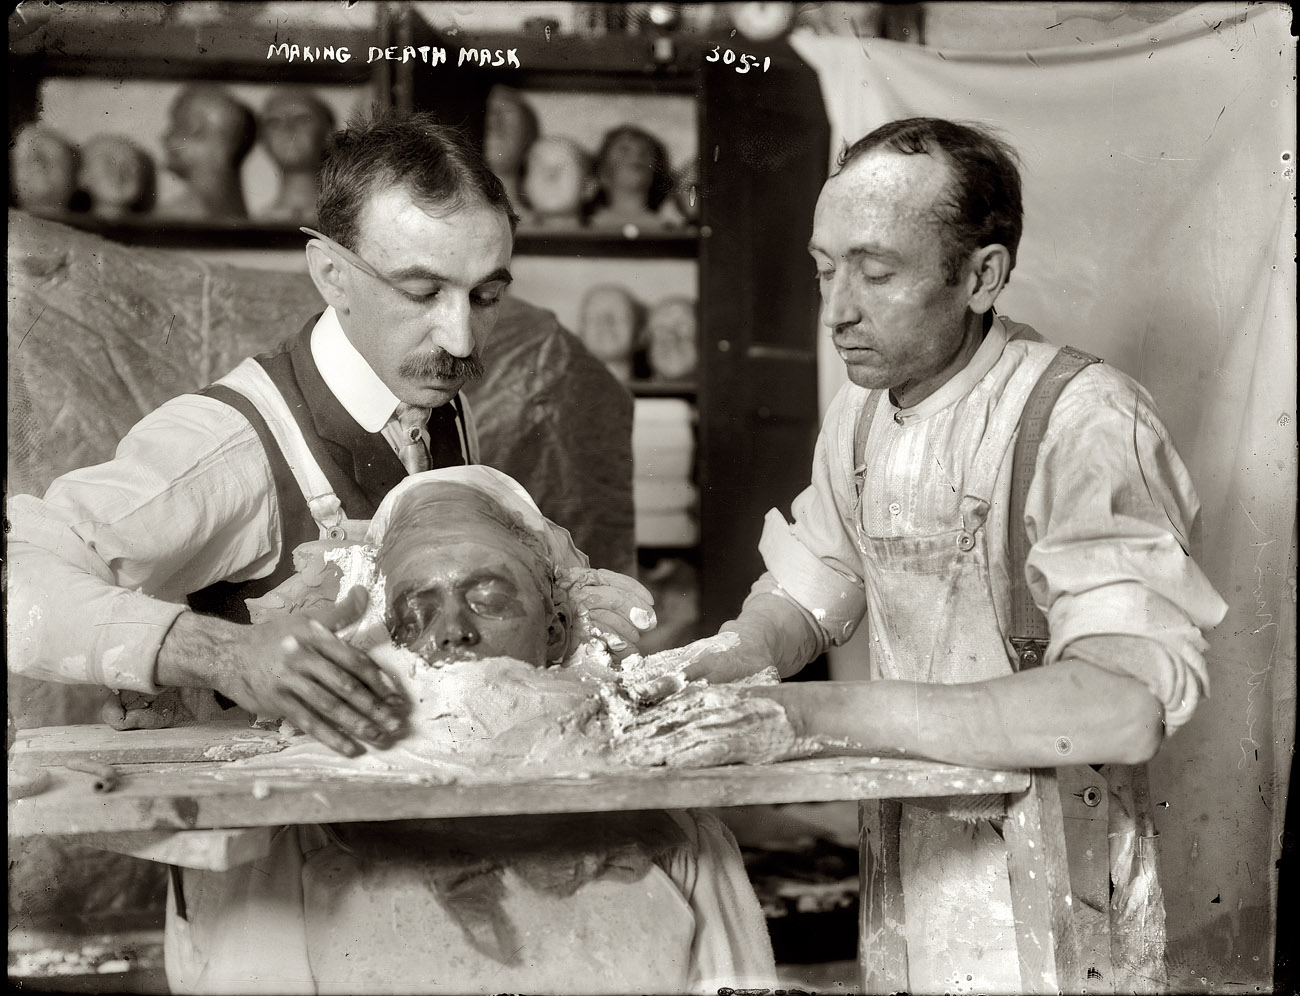 New York circa 1908. Making a plaster death mask. View full size. 8x10 glass negative, George Grantham Bain Collection, Library of Congress.